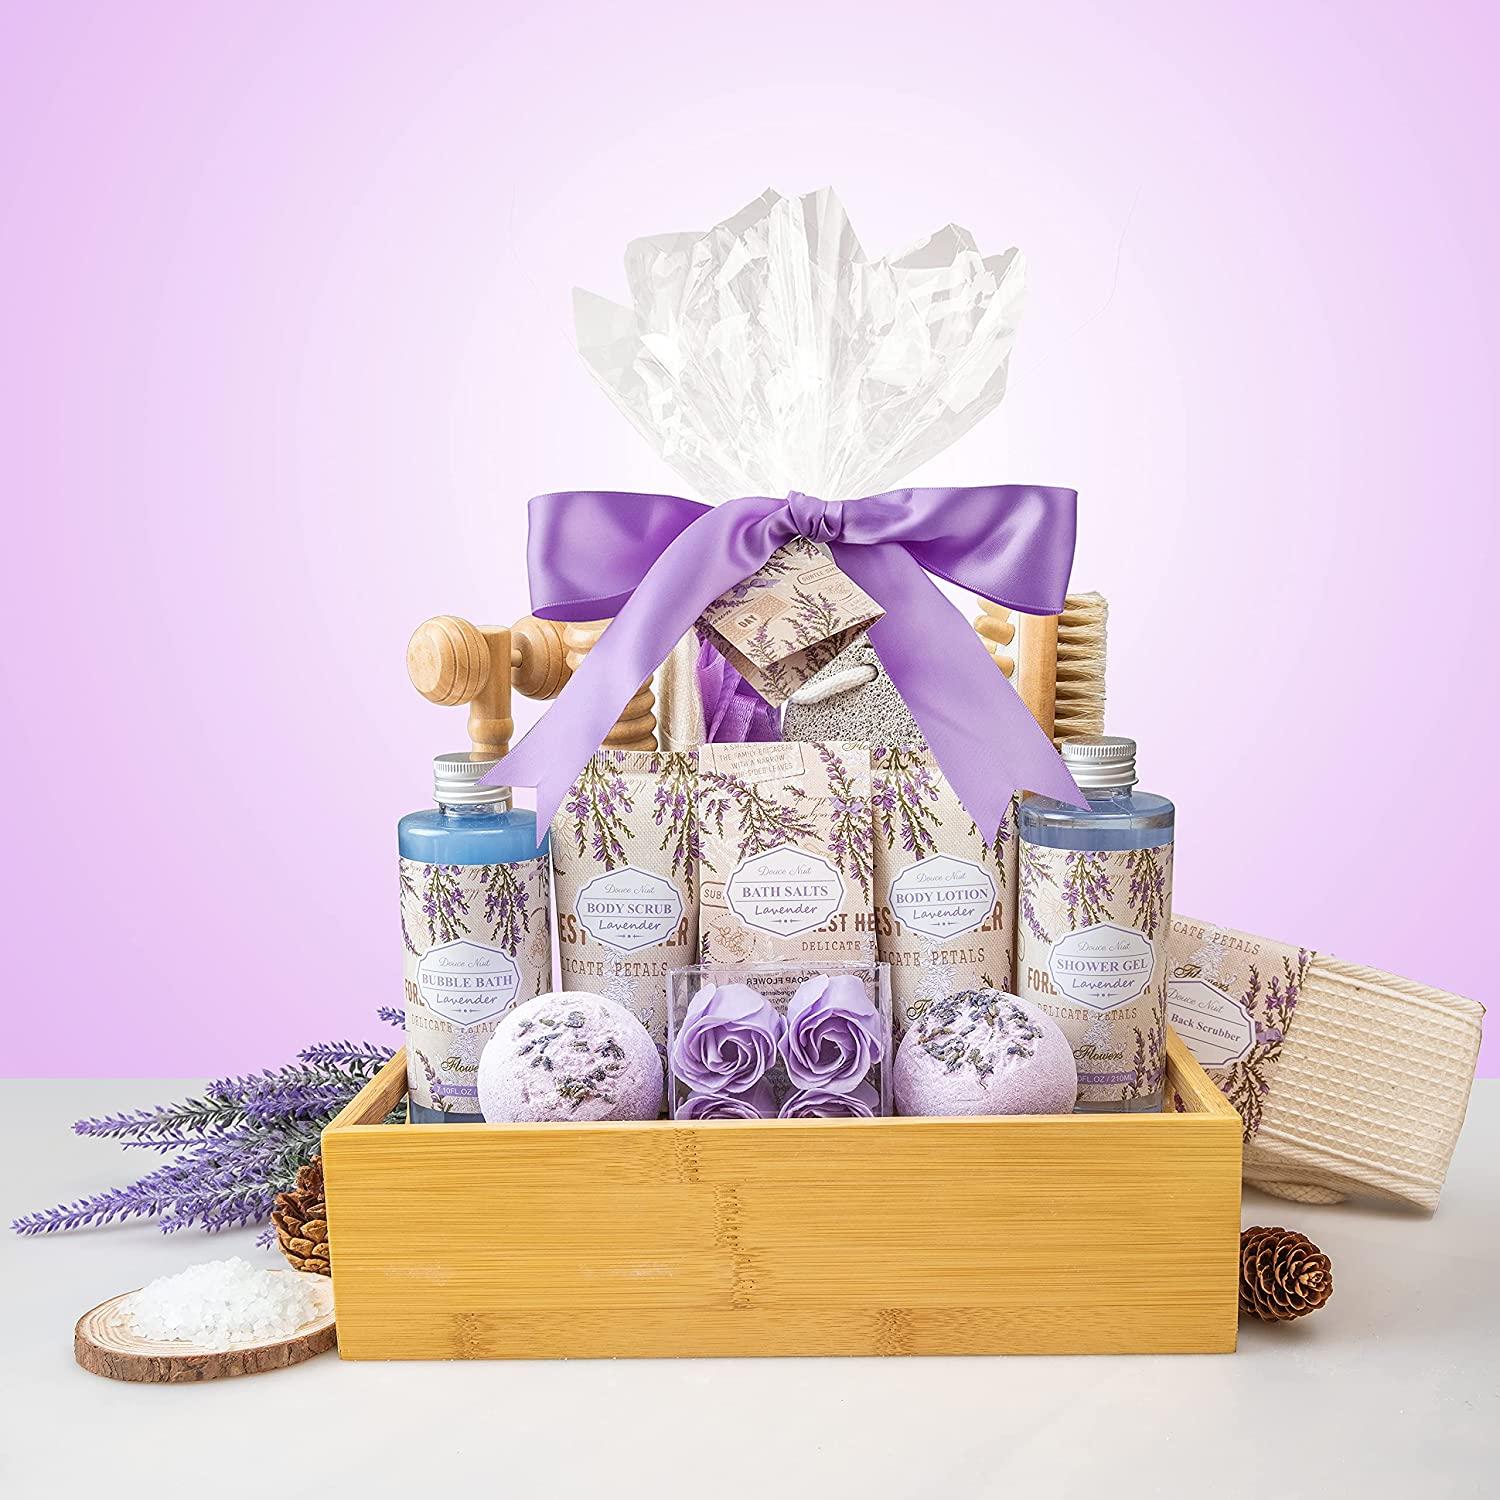 Birthday Gifts for Women,Spa Gift Baskets for Women Birthday Gift